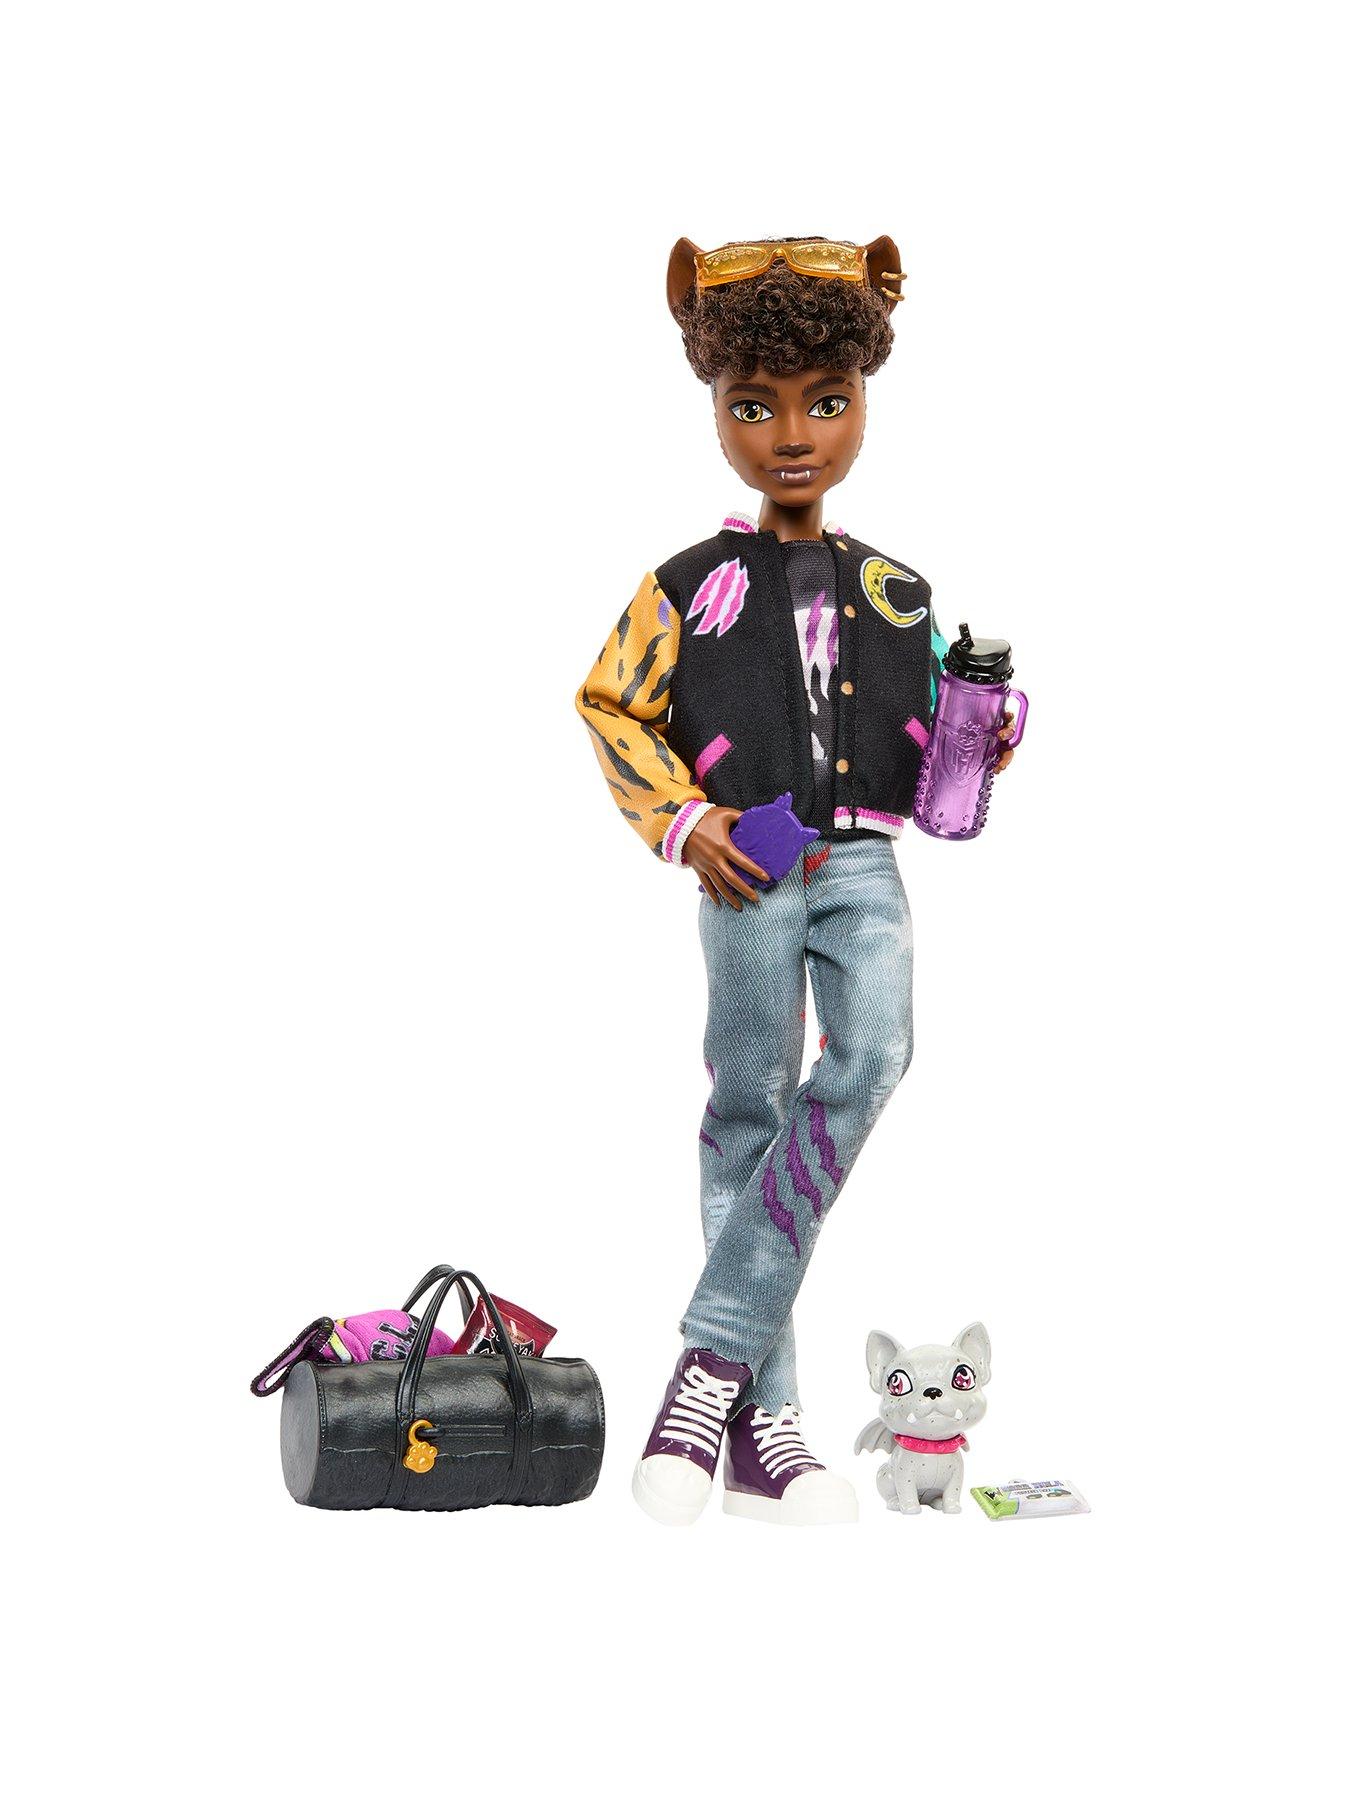  Monster High Deuce Gorgon Posable Doll, Pet and Accessories,  Denim Snake Jacket, Tinted Sunglasses, Kids Toys ( Exclusive) : Toys  & Games